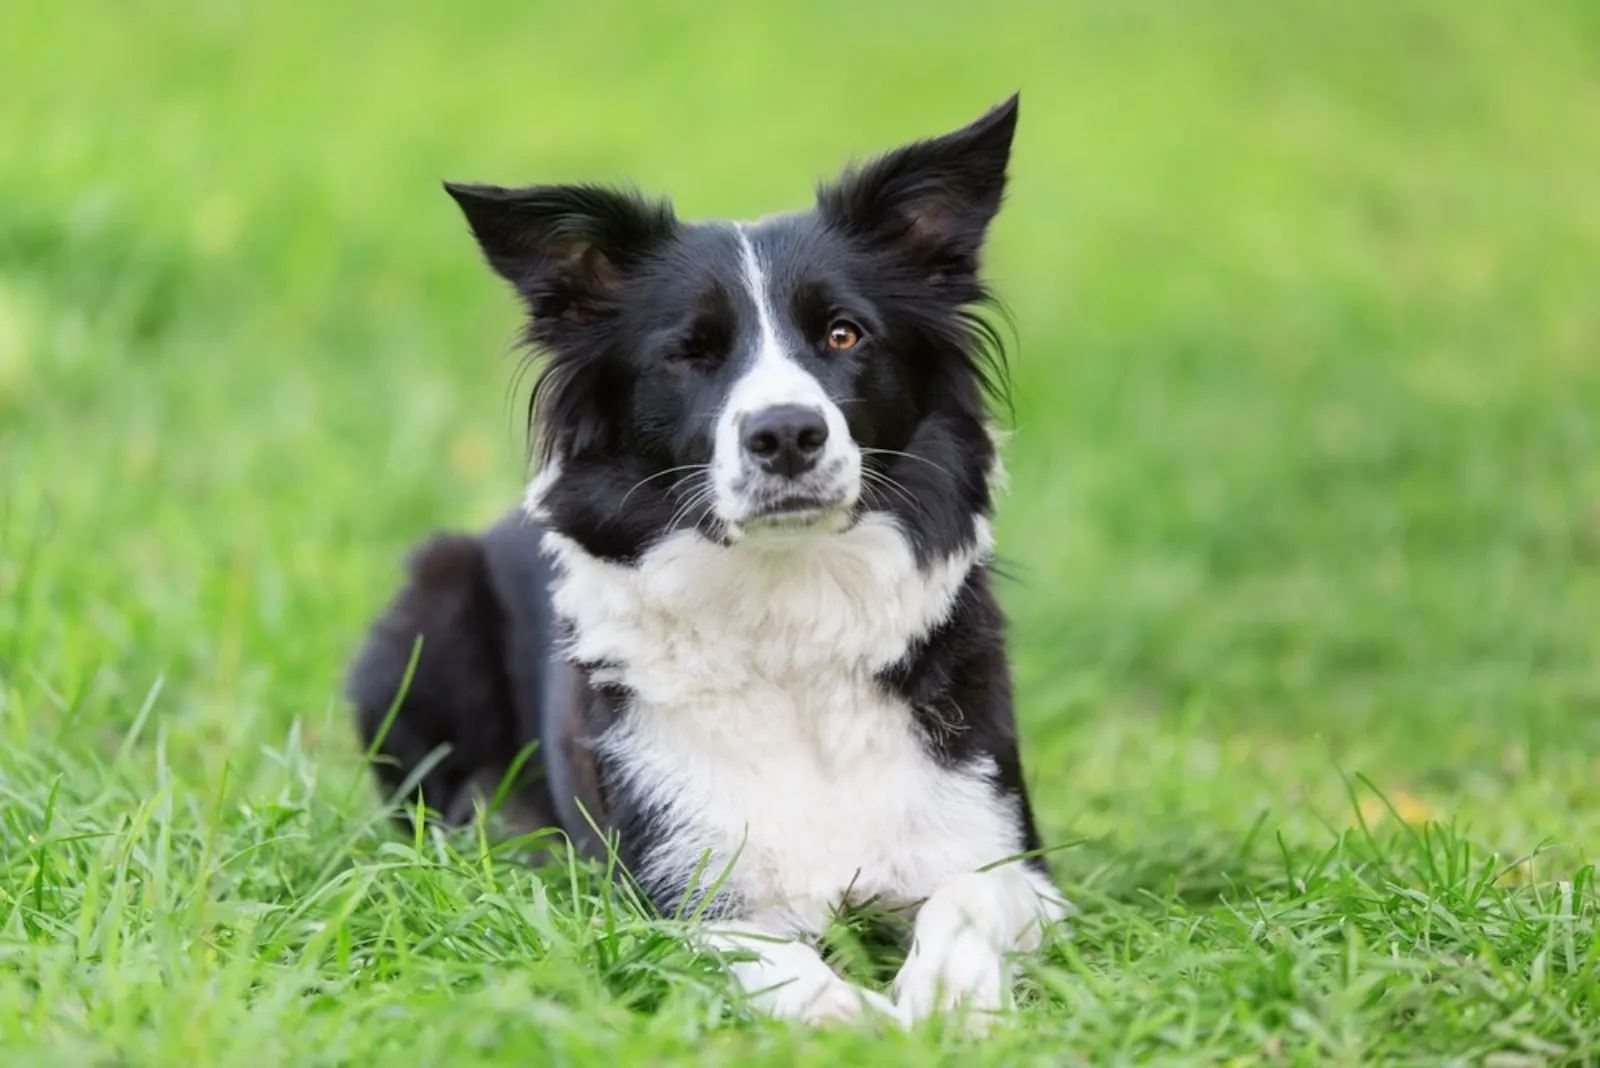 Adorable Border collie dog wink in the green grass